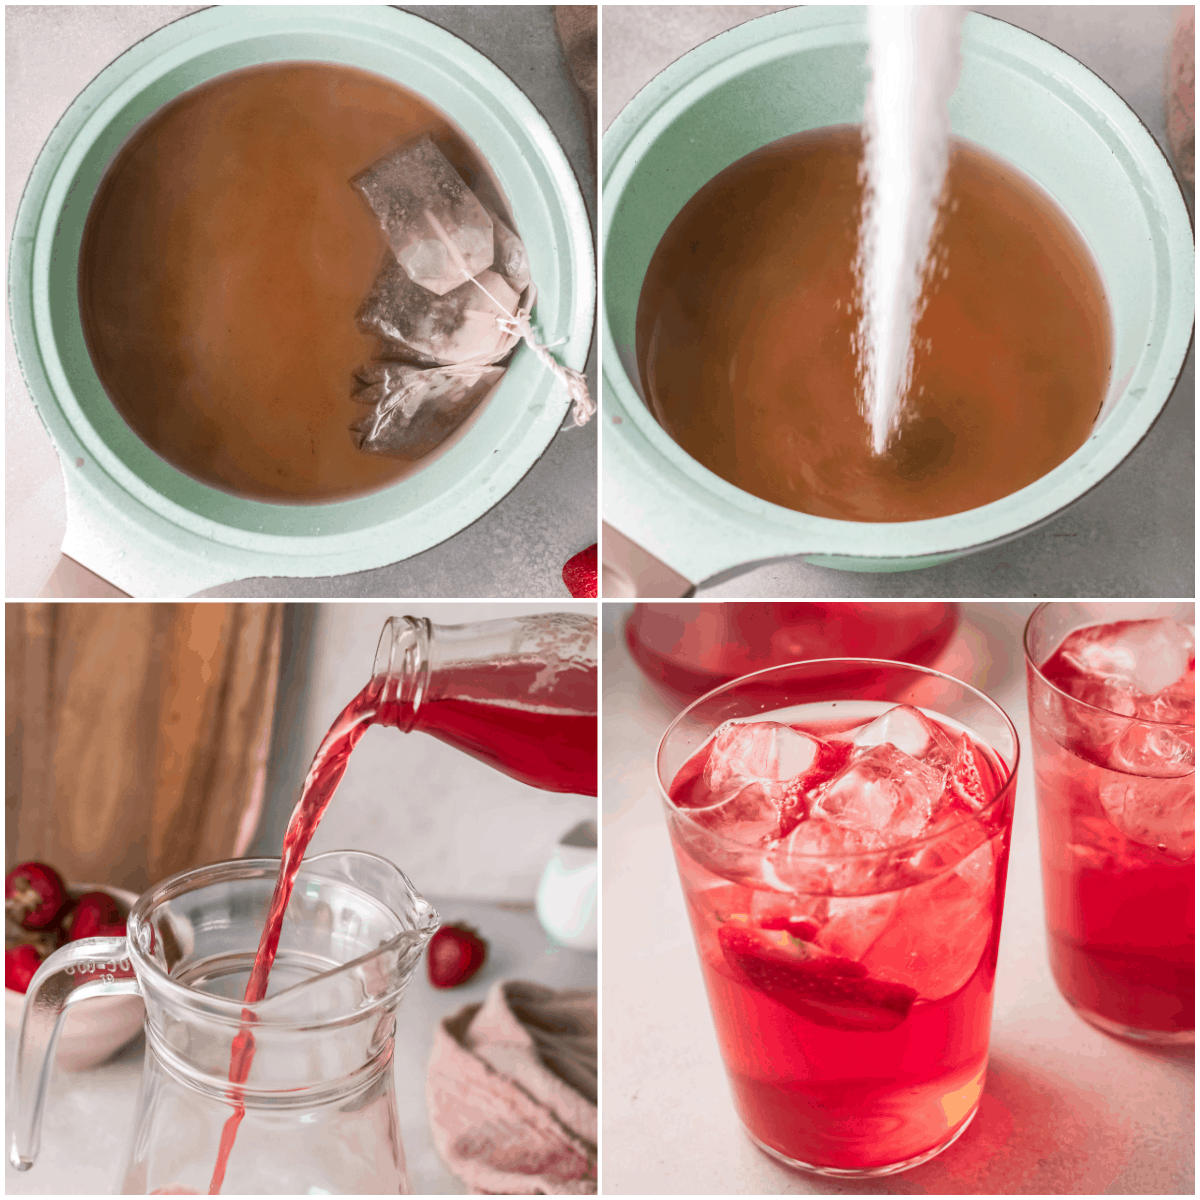 image collage showing the steps for making strawberry sweet tea